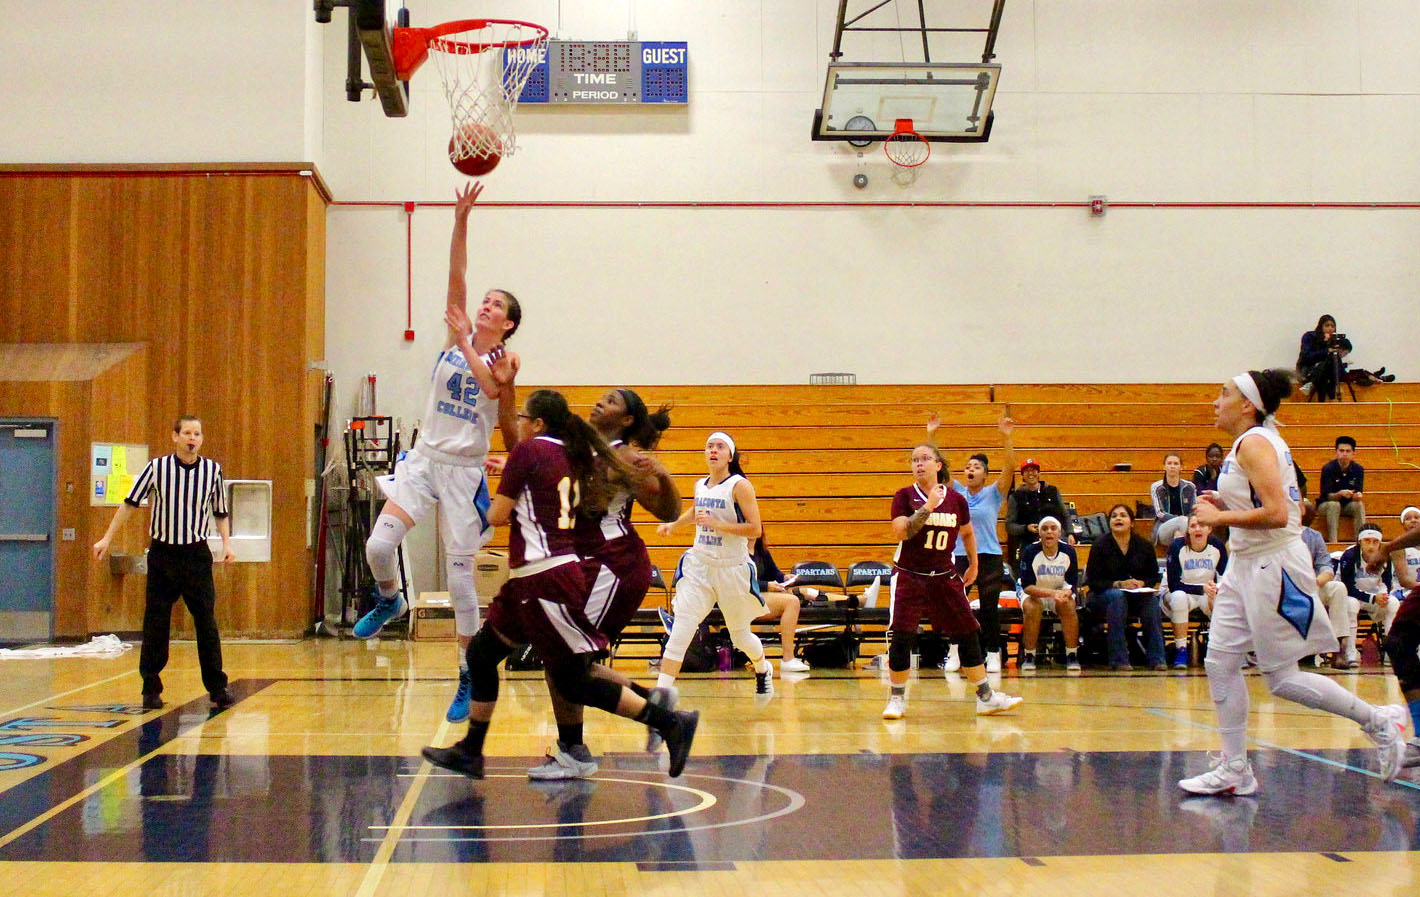 Colleen Murphy shoots a layup in a game against Southwestern College.